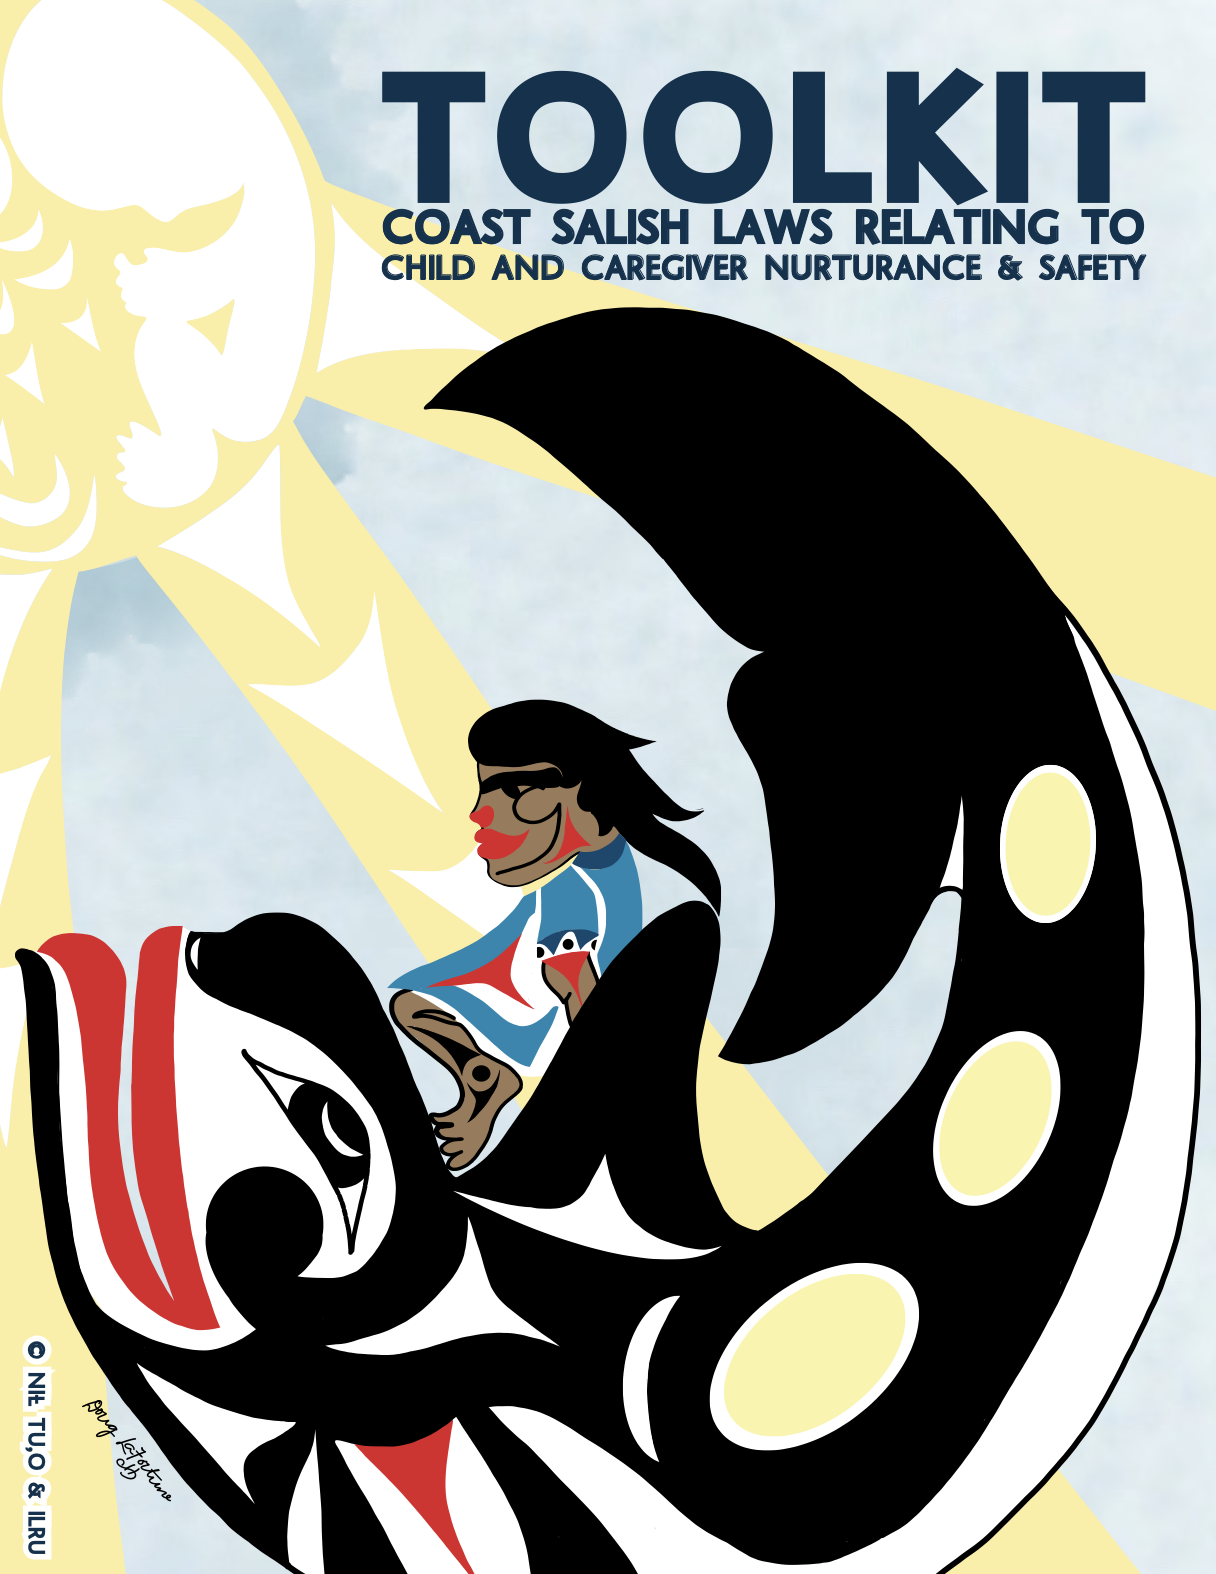 Toolkit: Coast Salish Laws Relating to Child and Caregiver Nurturance & Safety Cover with Doug La Fortune's Orca artwork